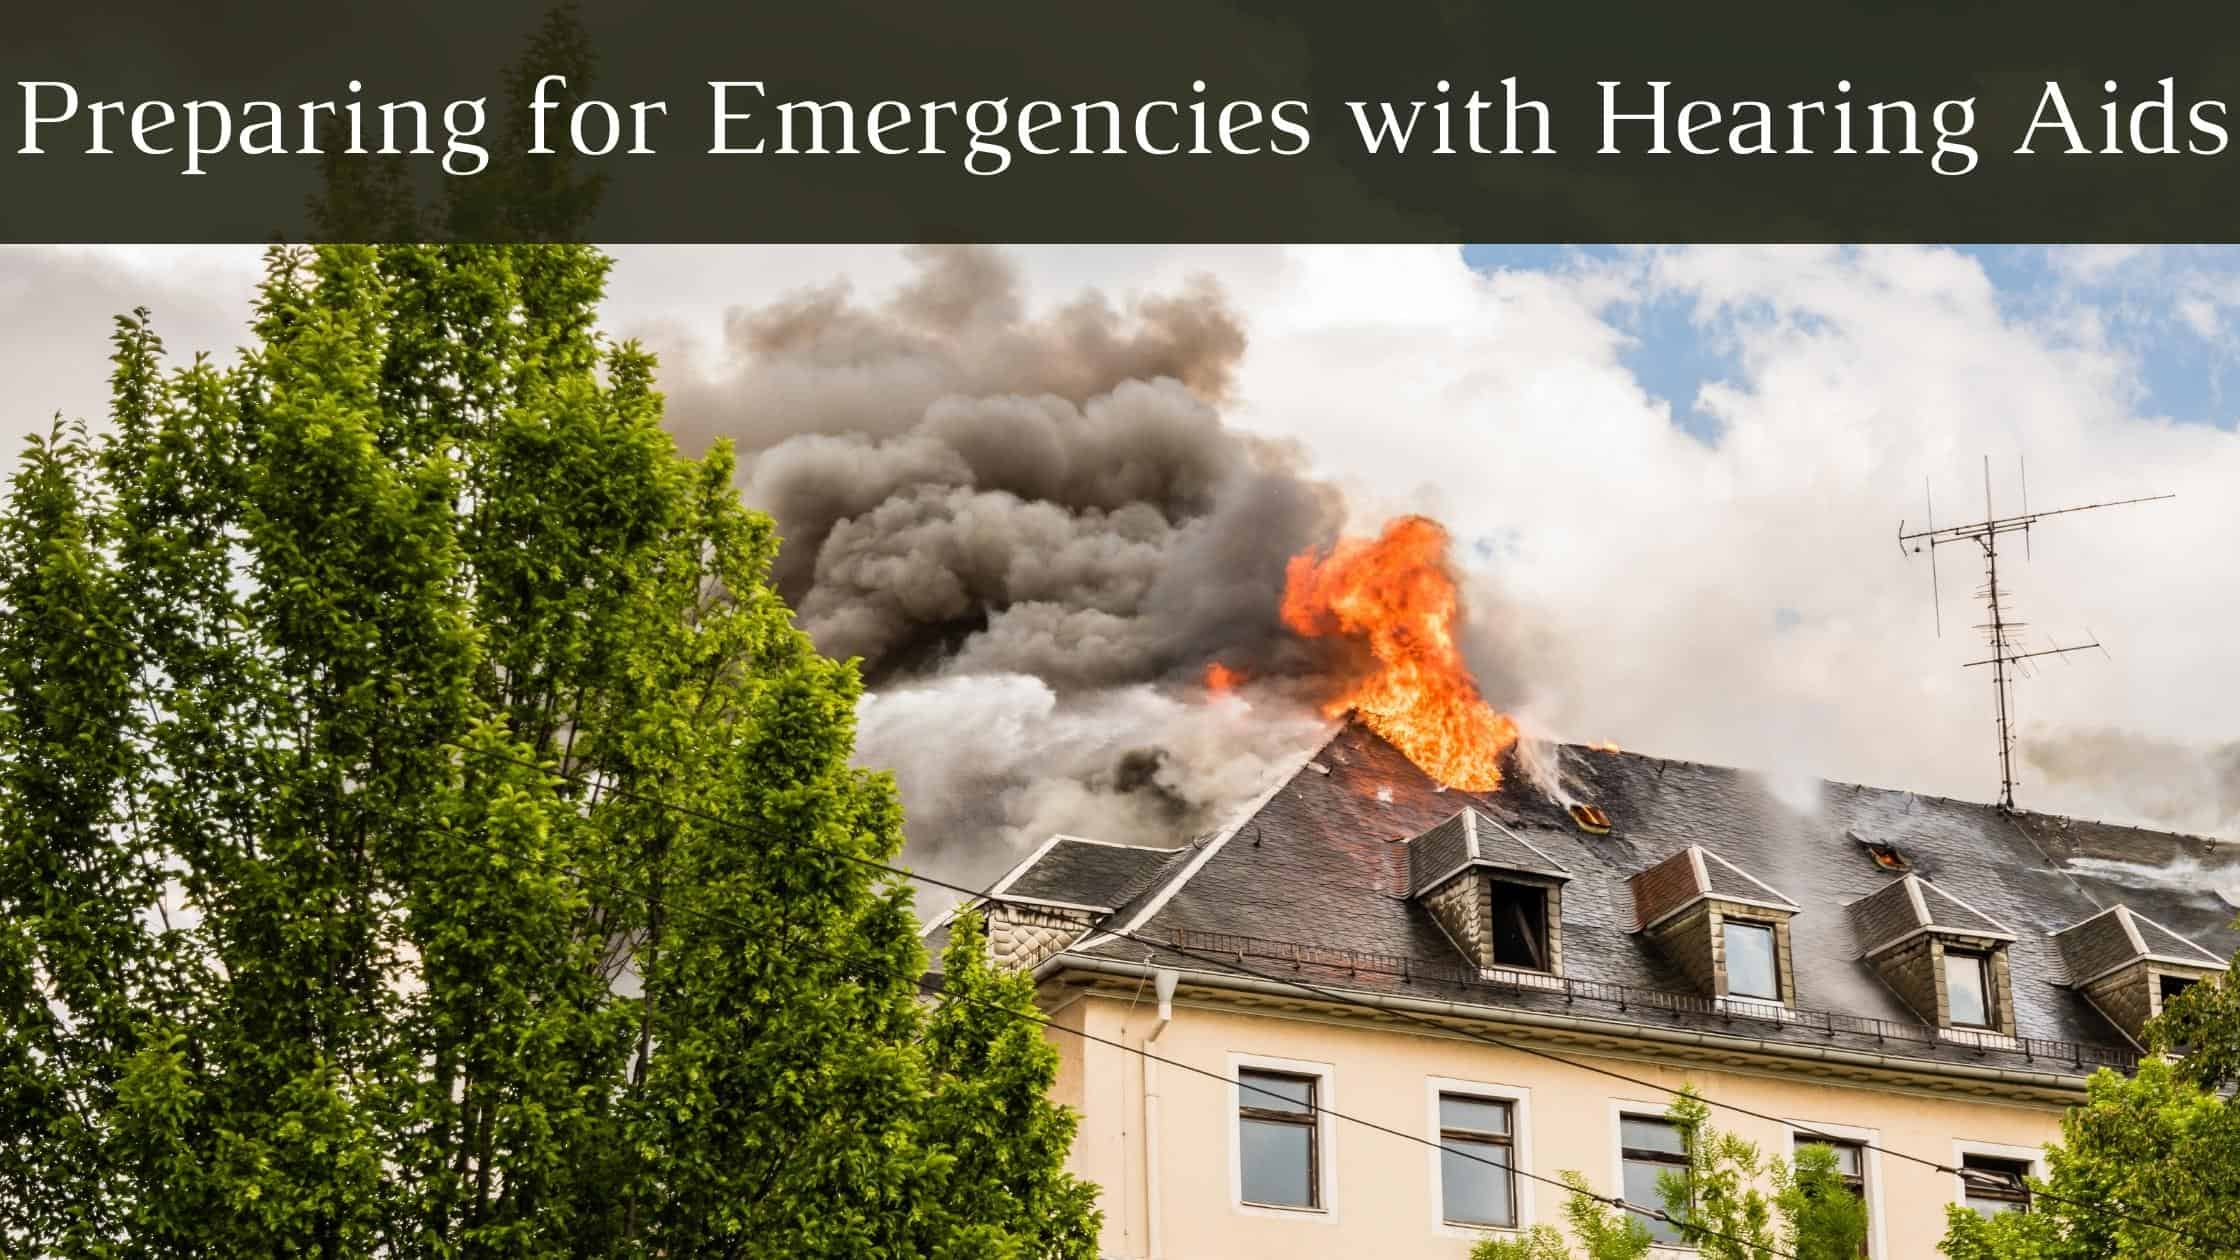 Preparing for Emergencies with Hearing Aids